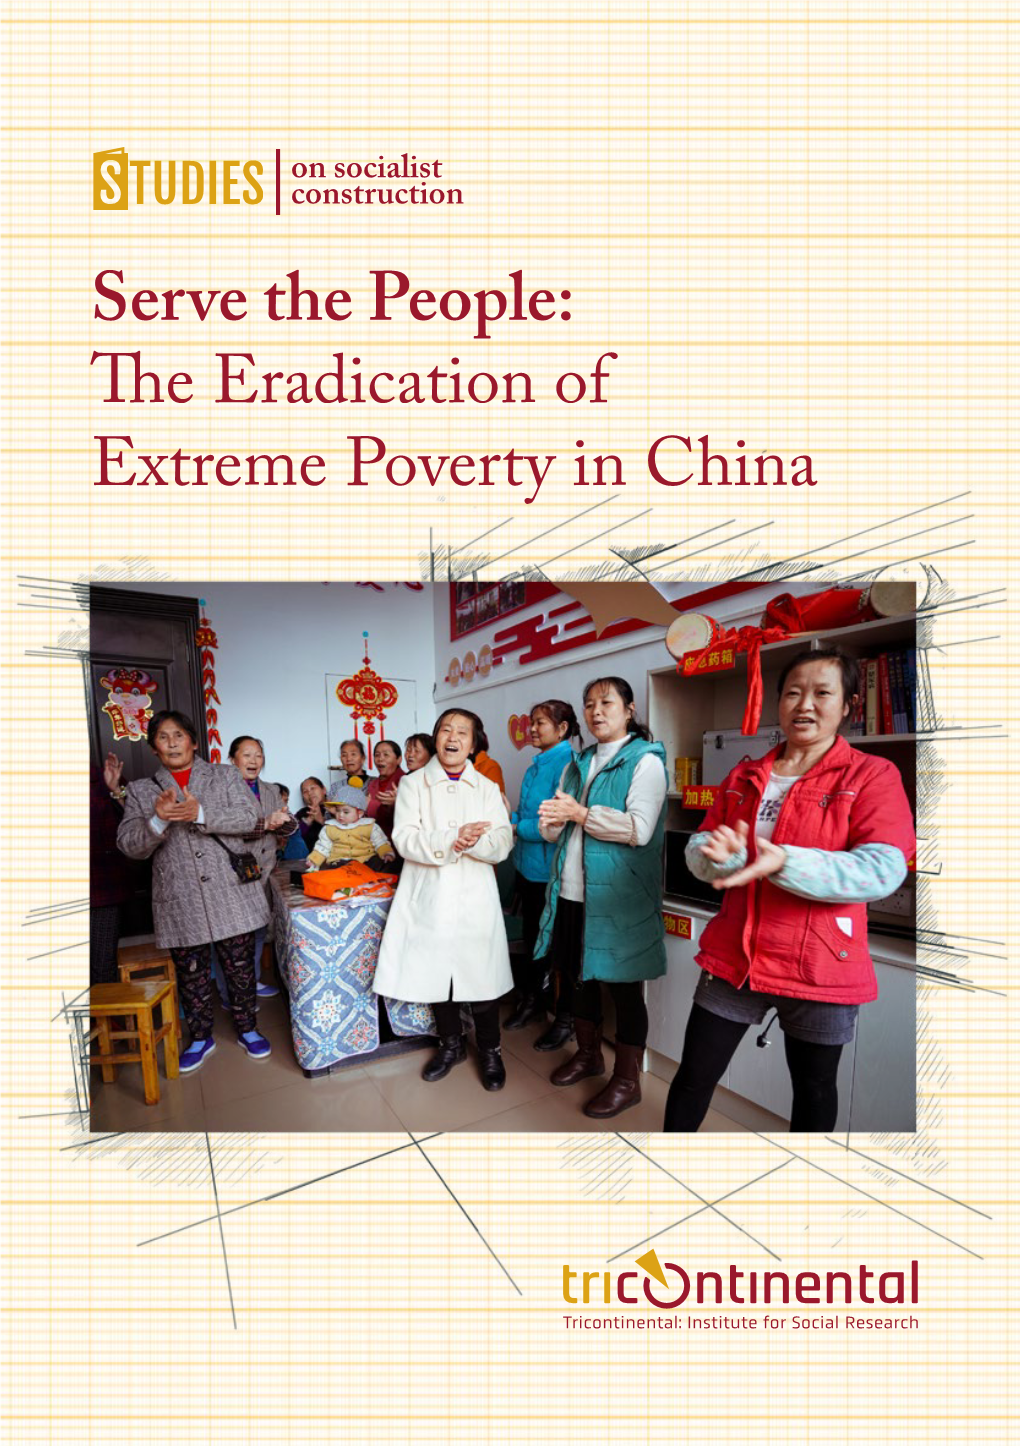 The Eradication of Extreme Poverty in China